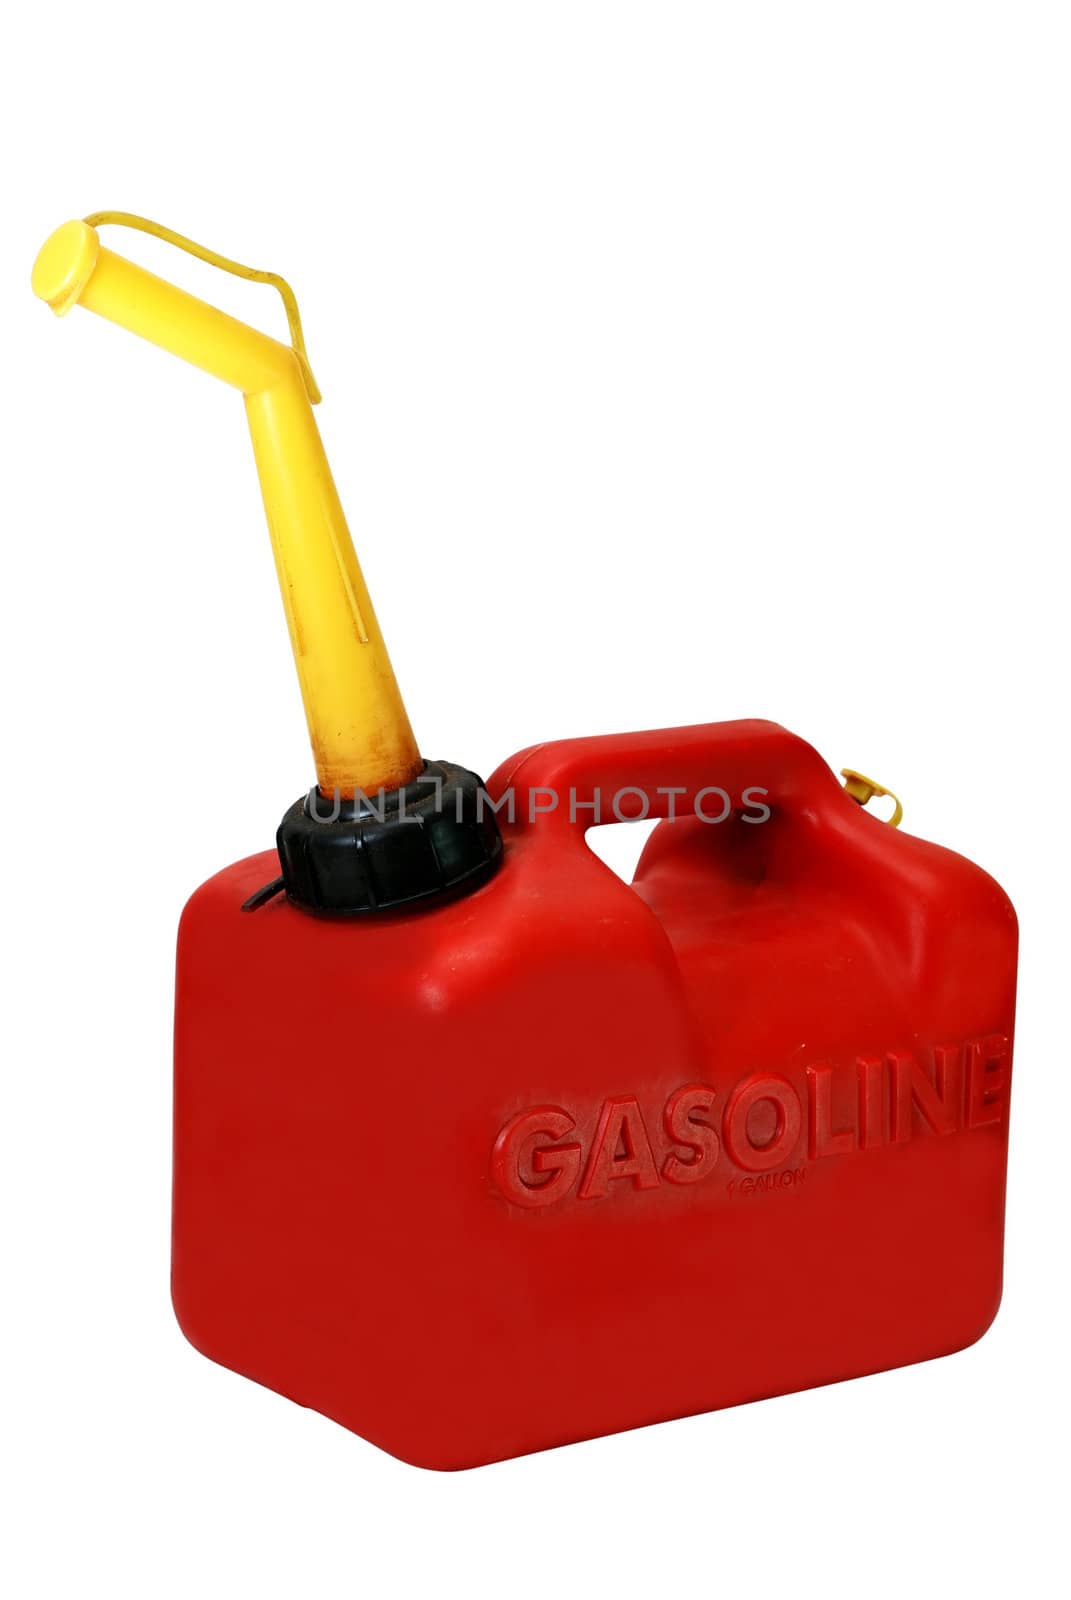 Gasoline Can by dehooks